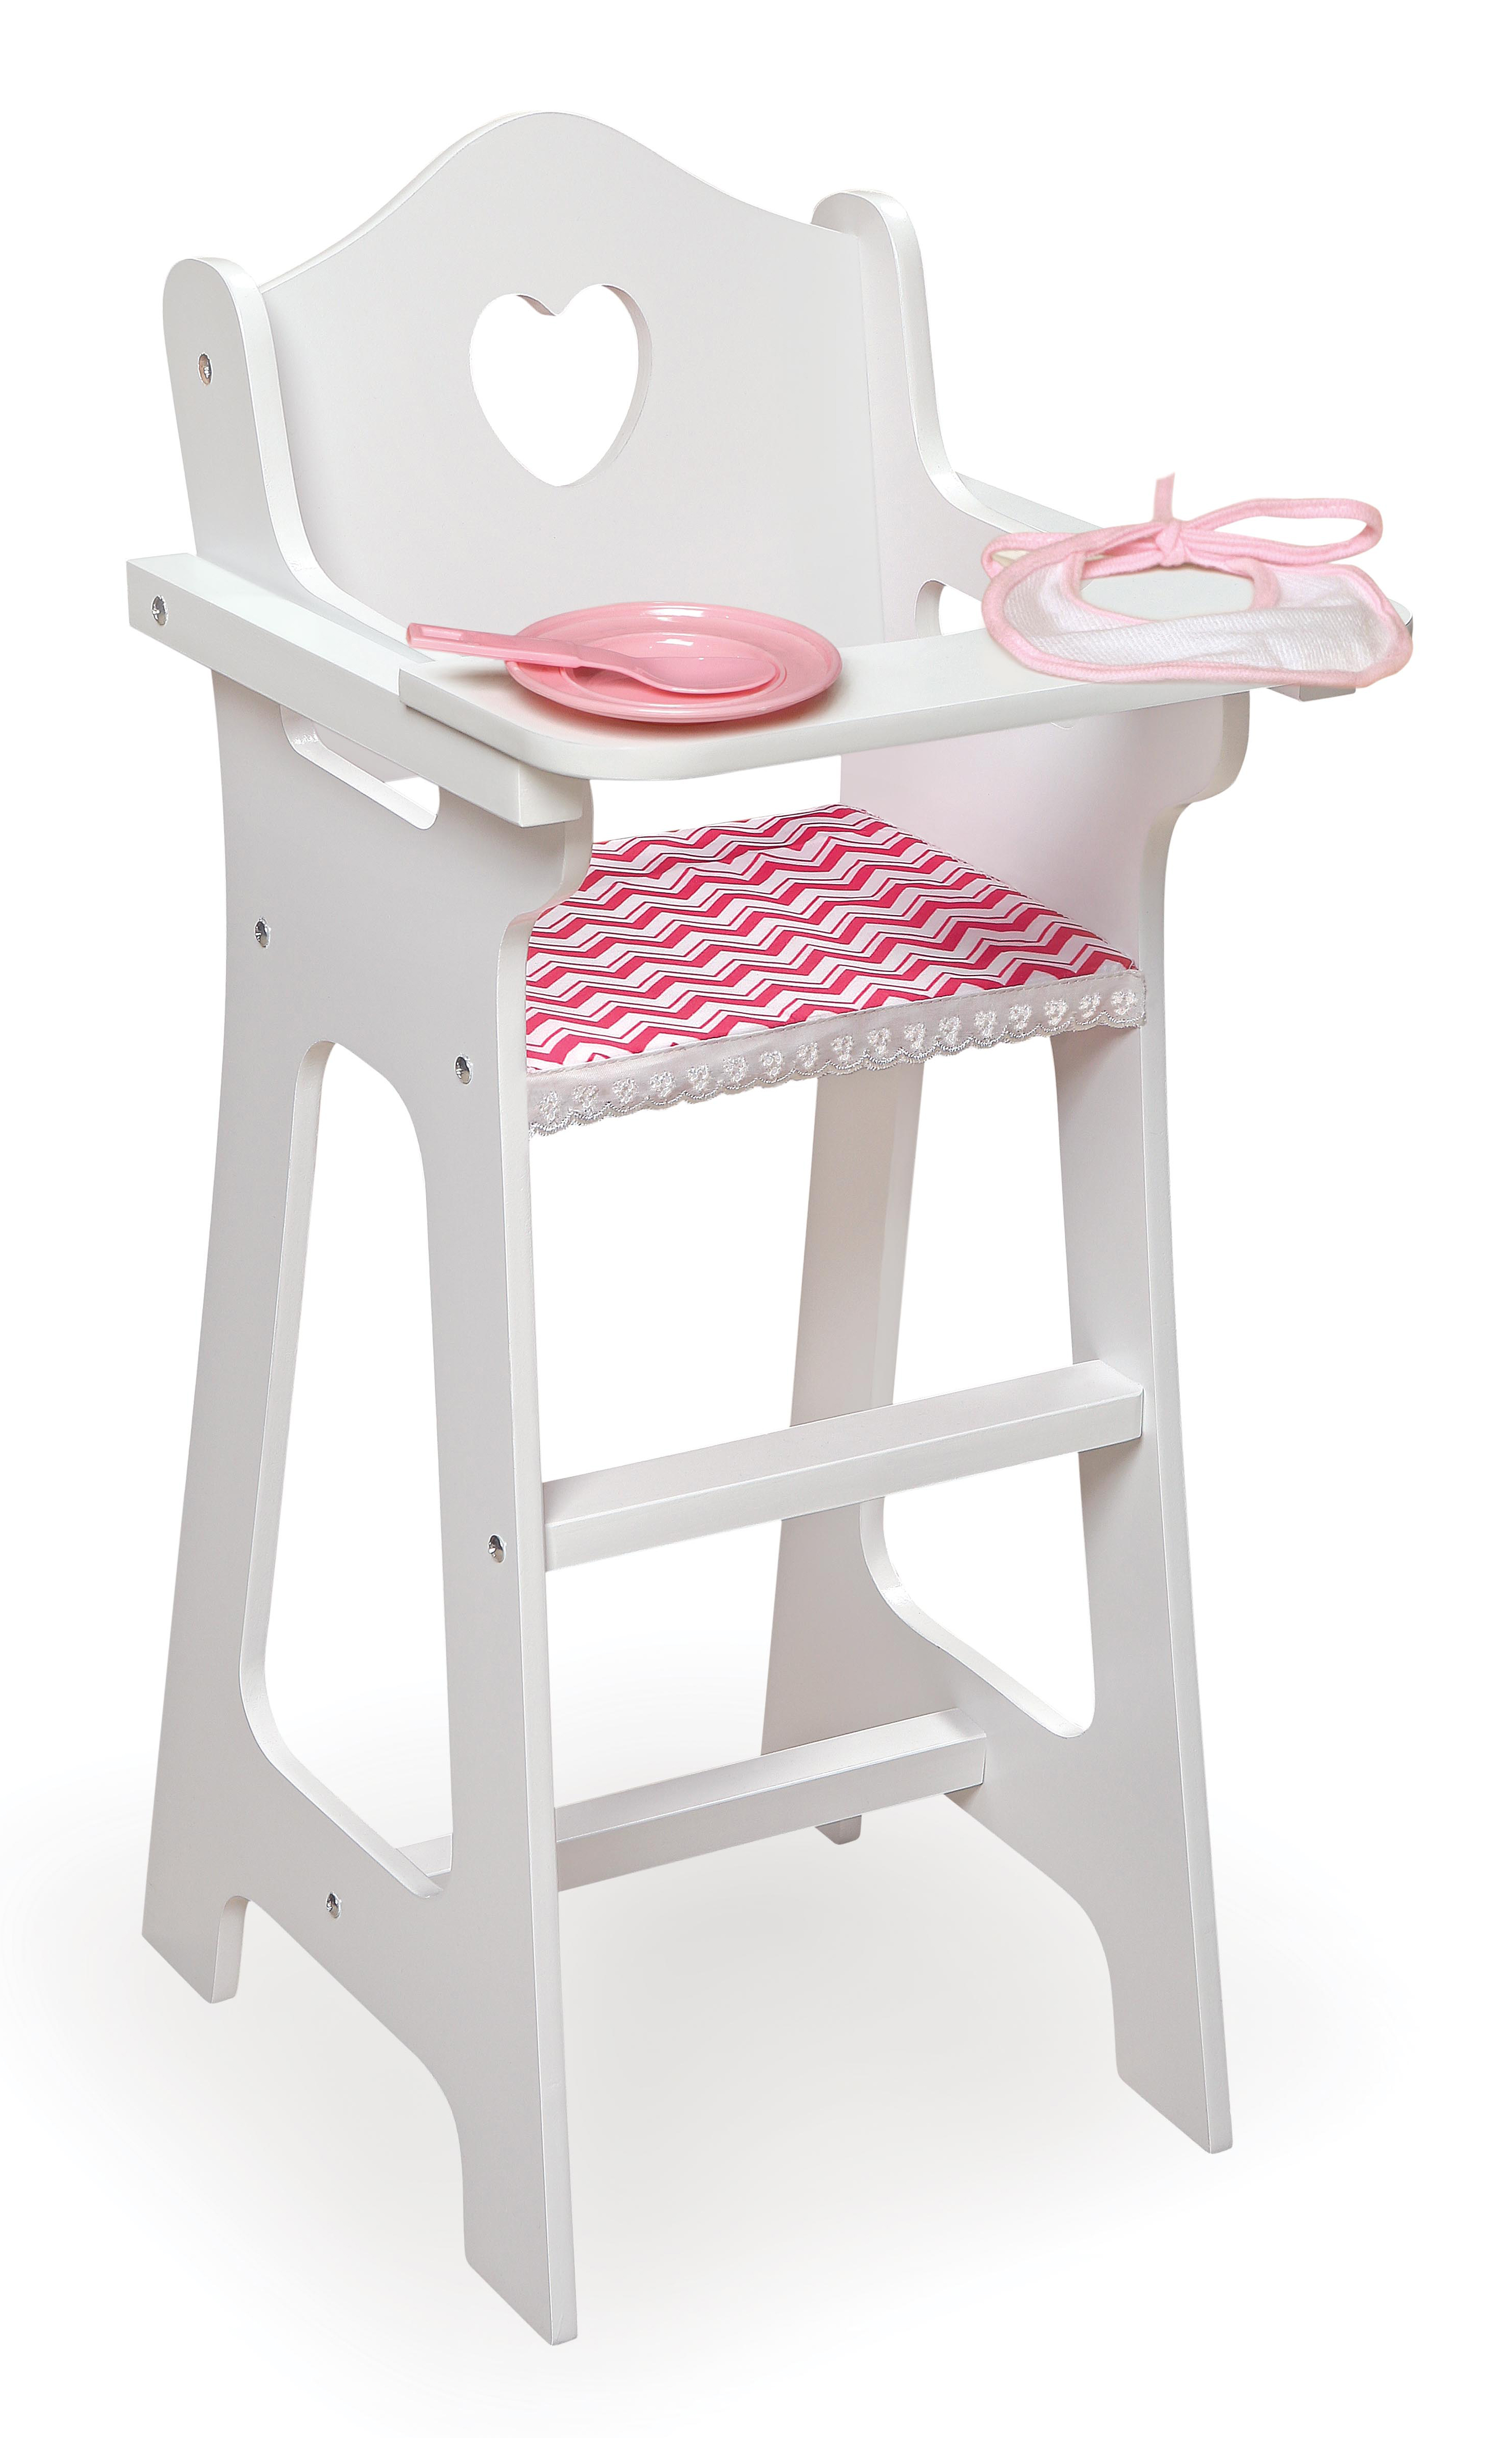 Doll High Chair with Accessories and Free Personalization Kit - White/Pink/Chevron